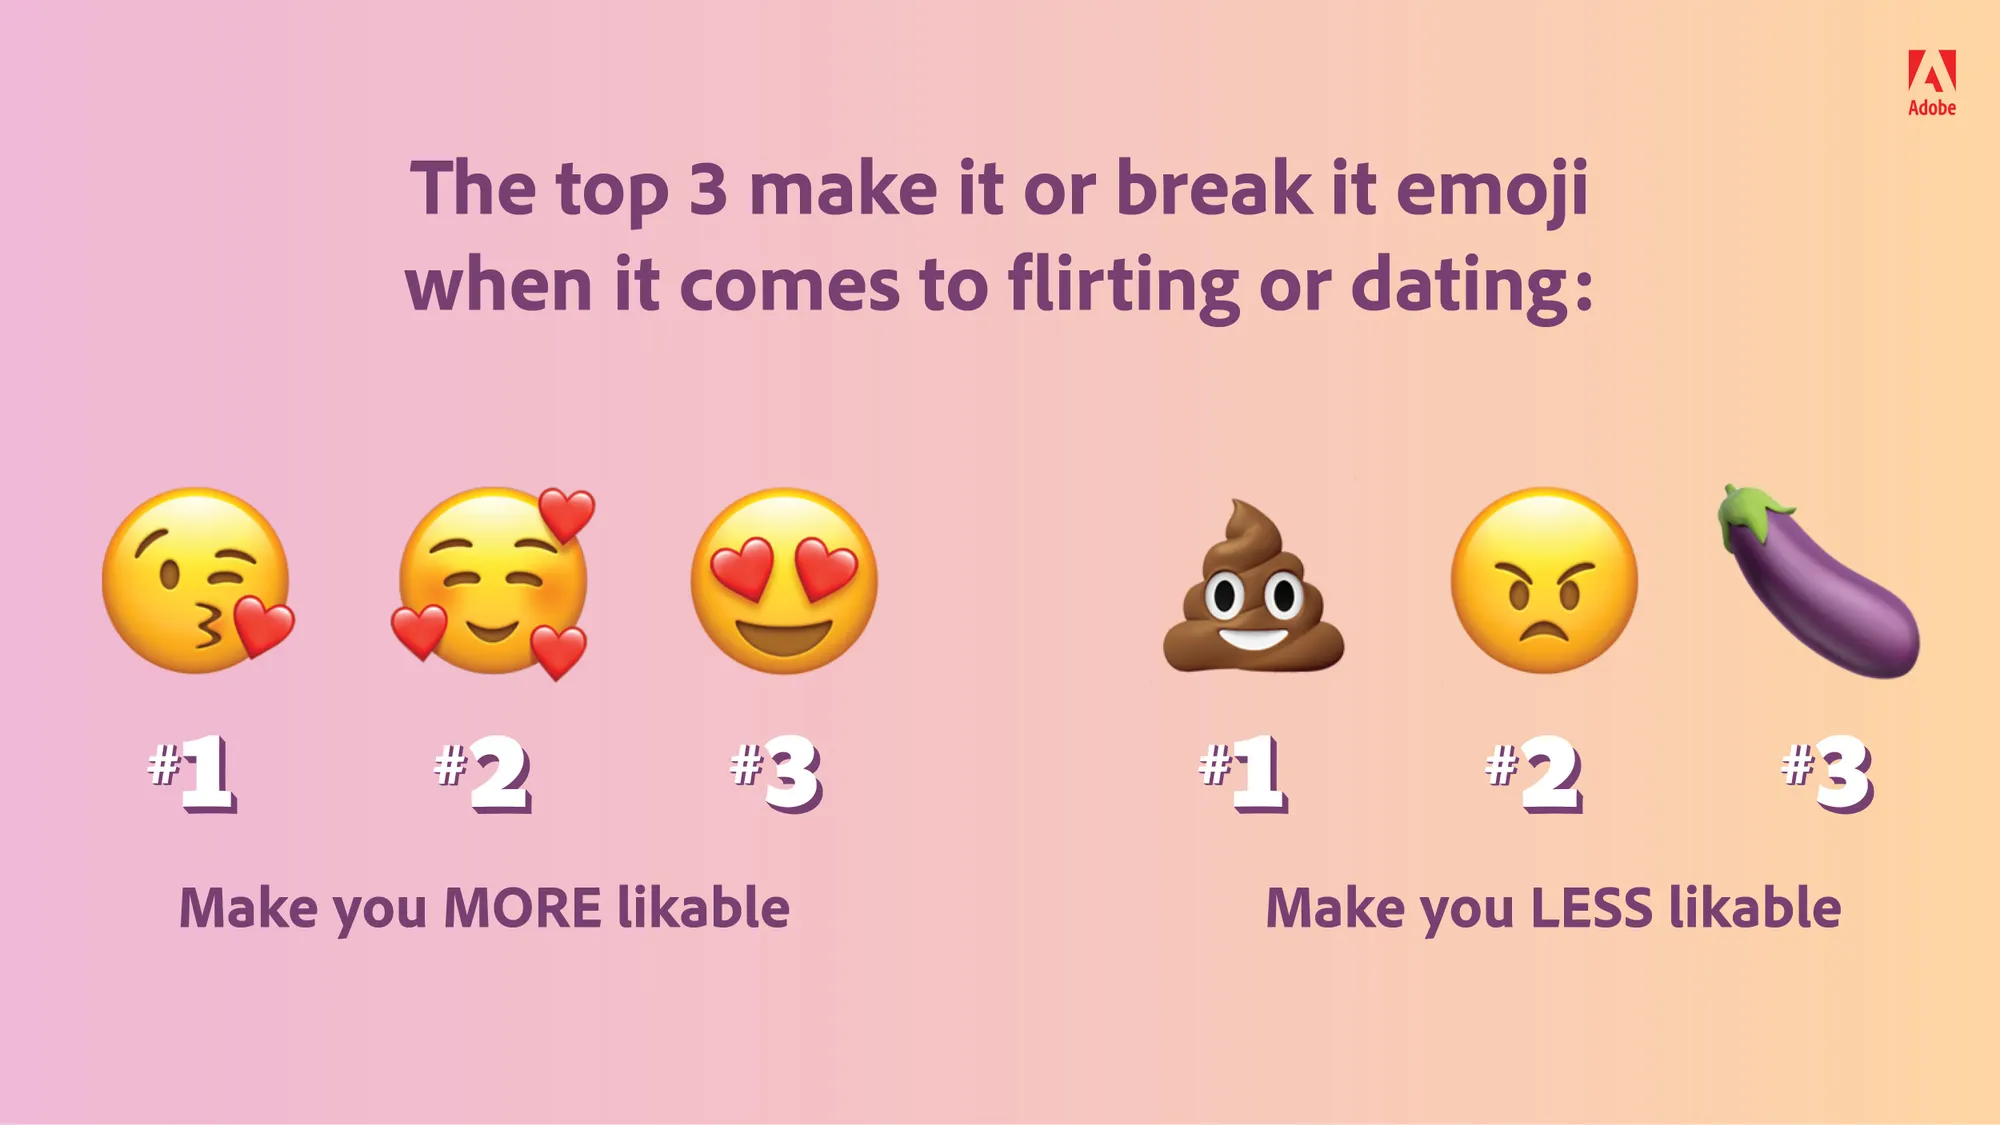 The top 3 make it or break it emoji when it comes to flirting or dating. 